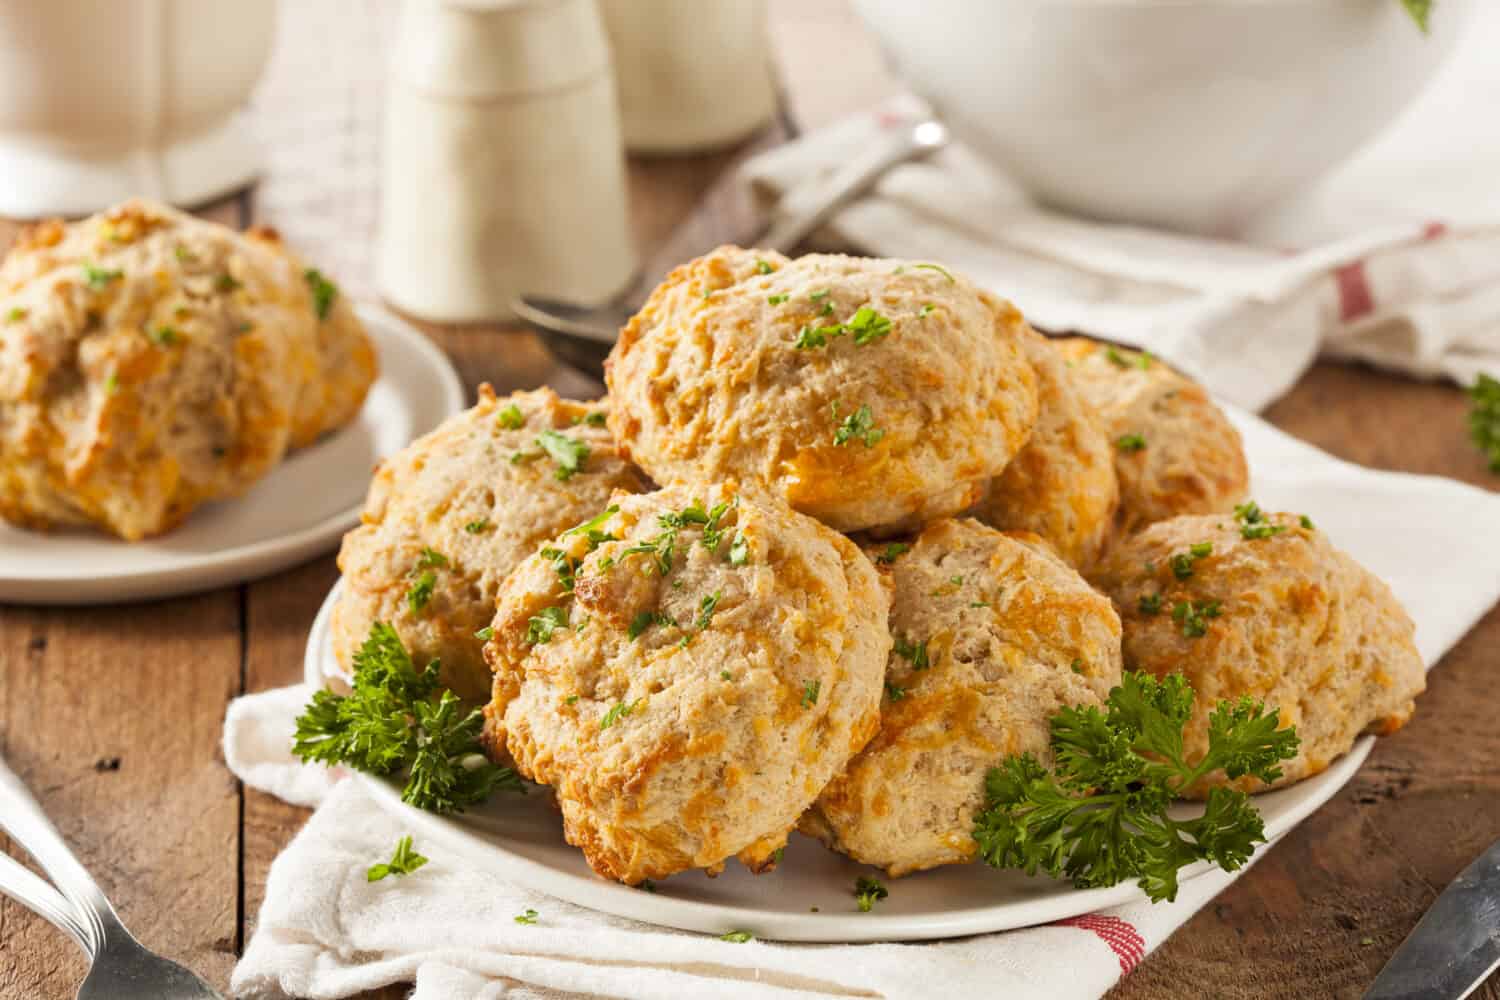 Homemade Cheddar Cheese Biscuits with Parsley